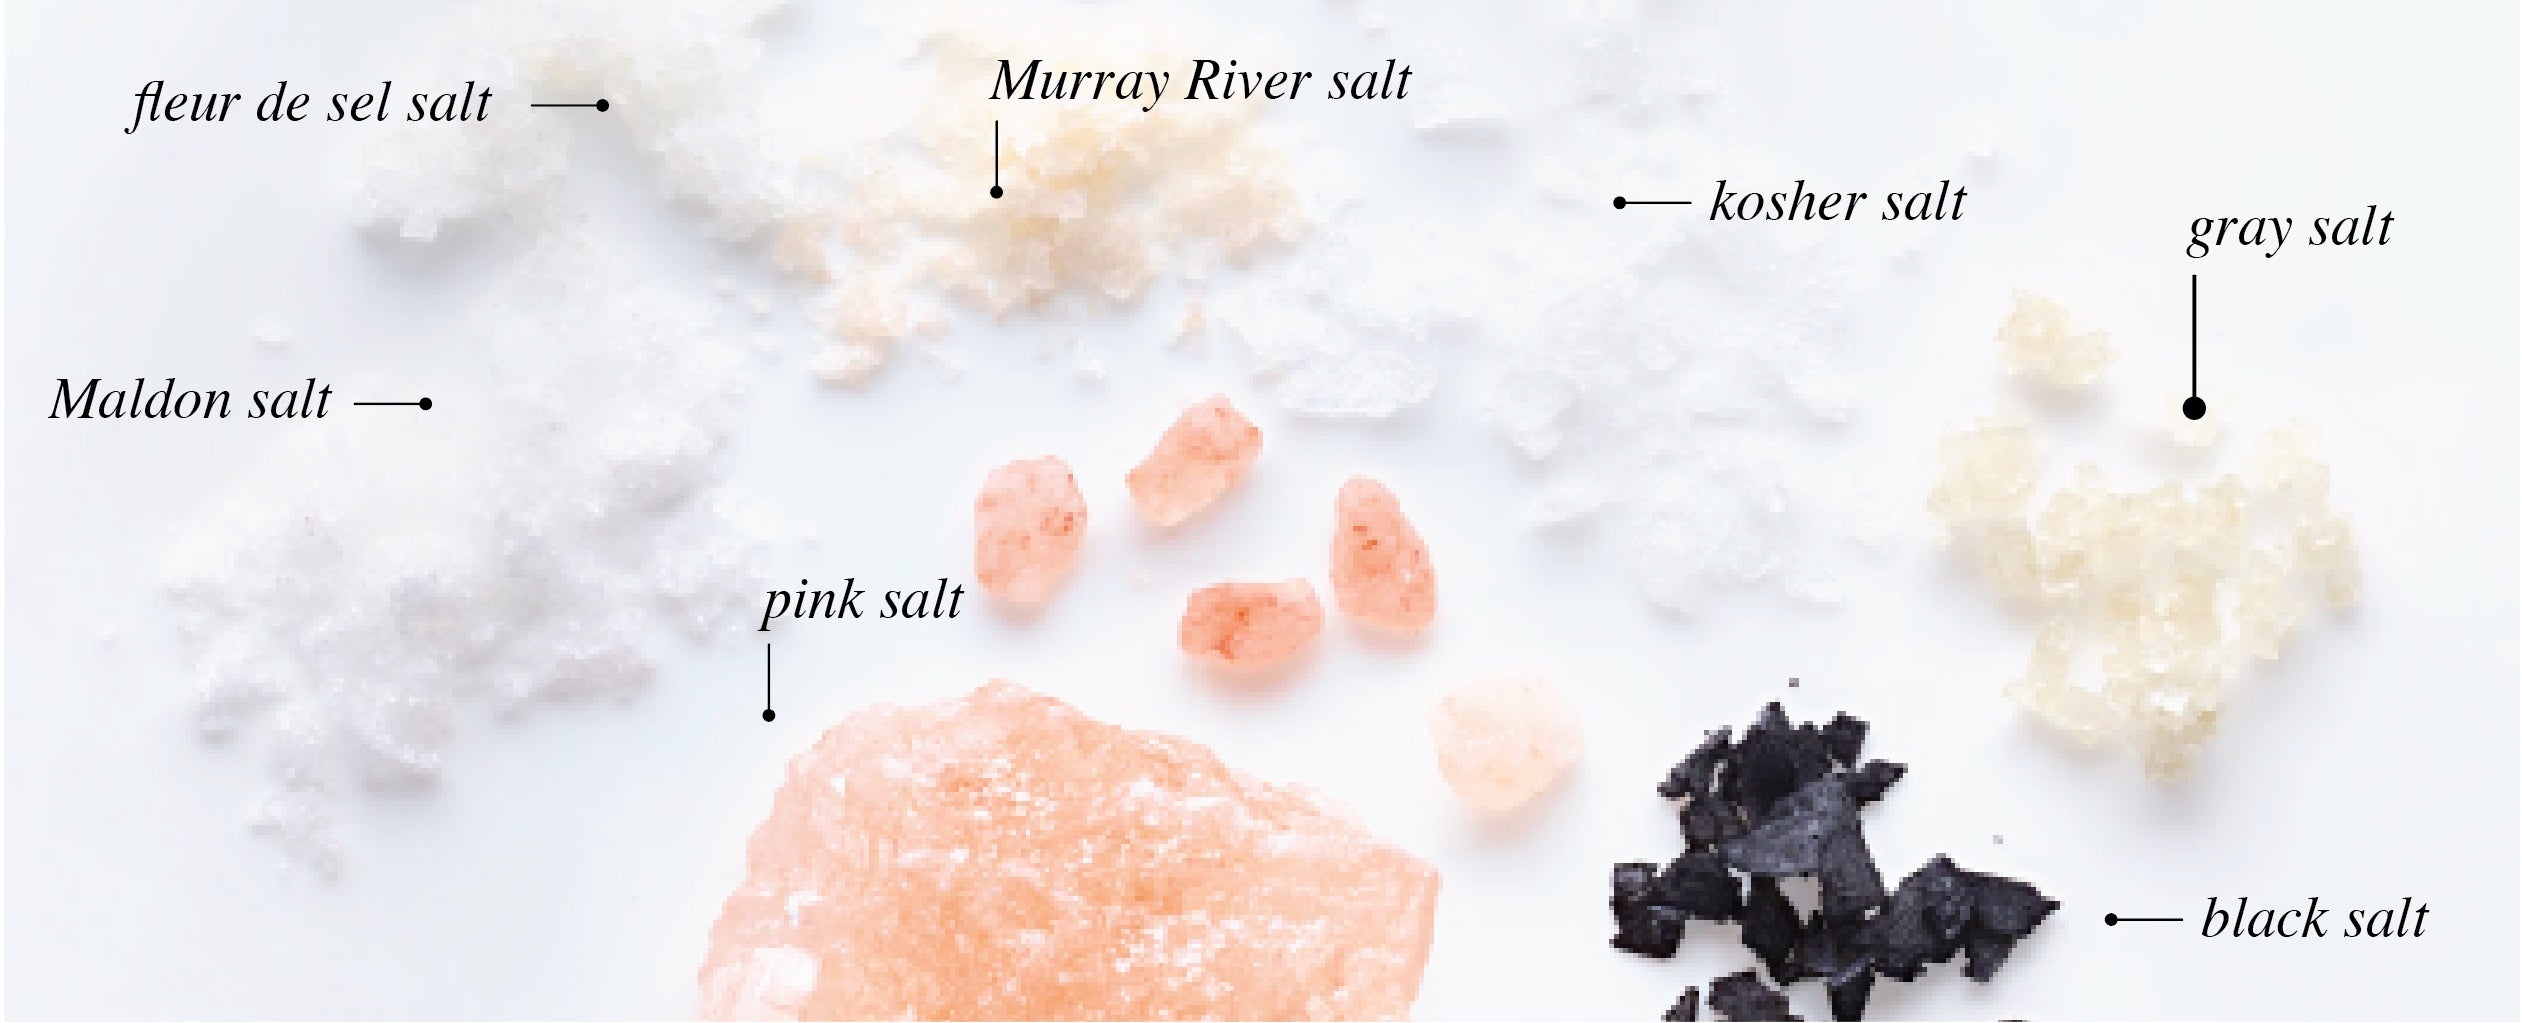 image of different kinds of salts